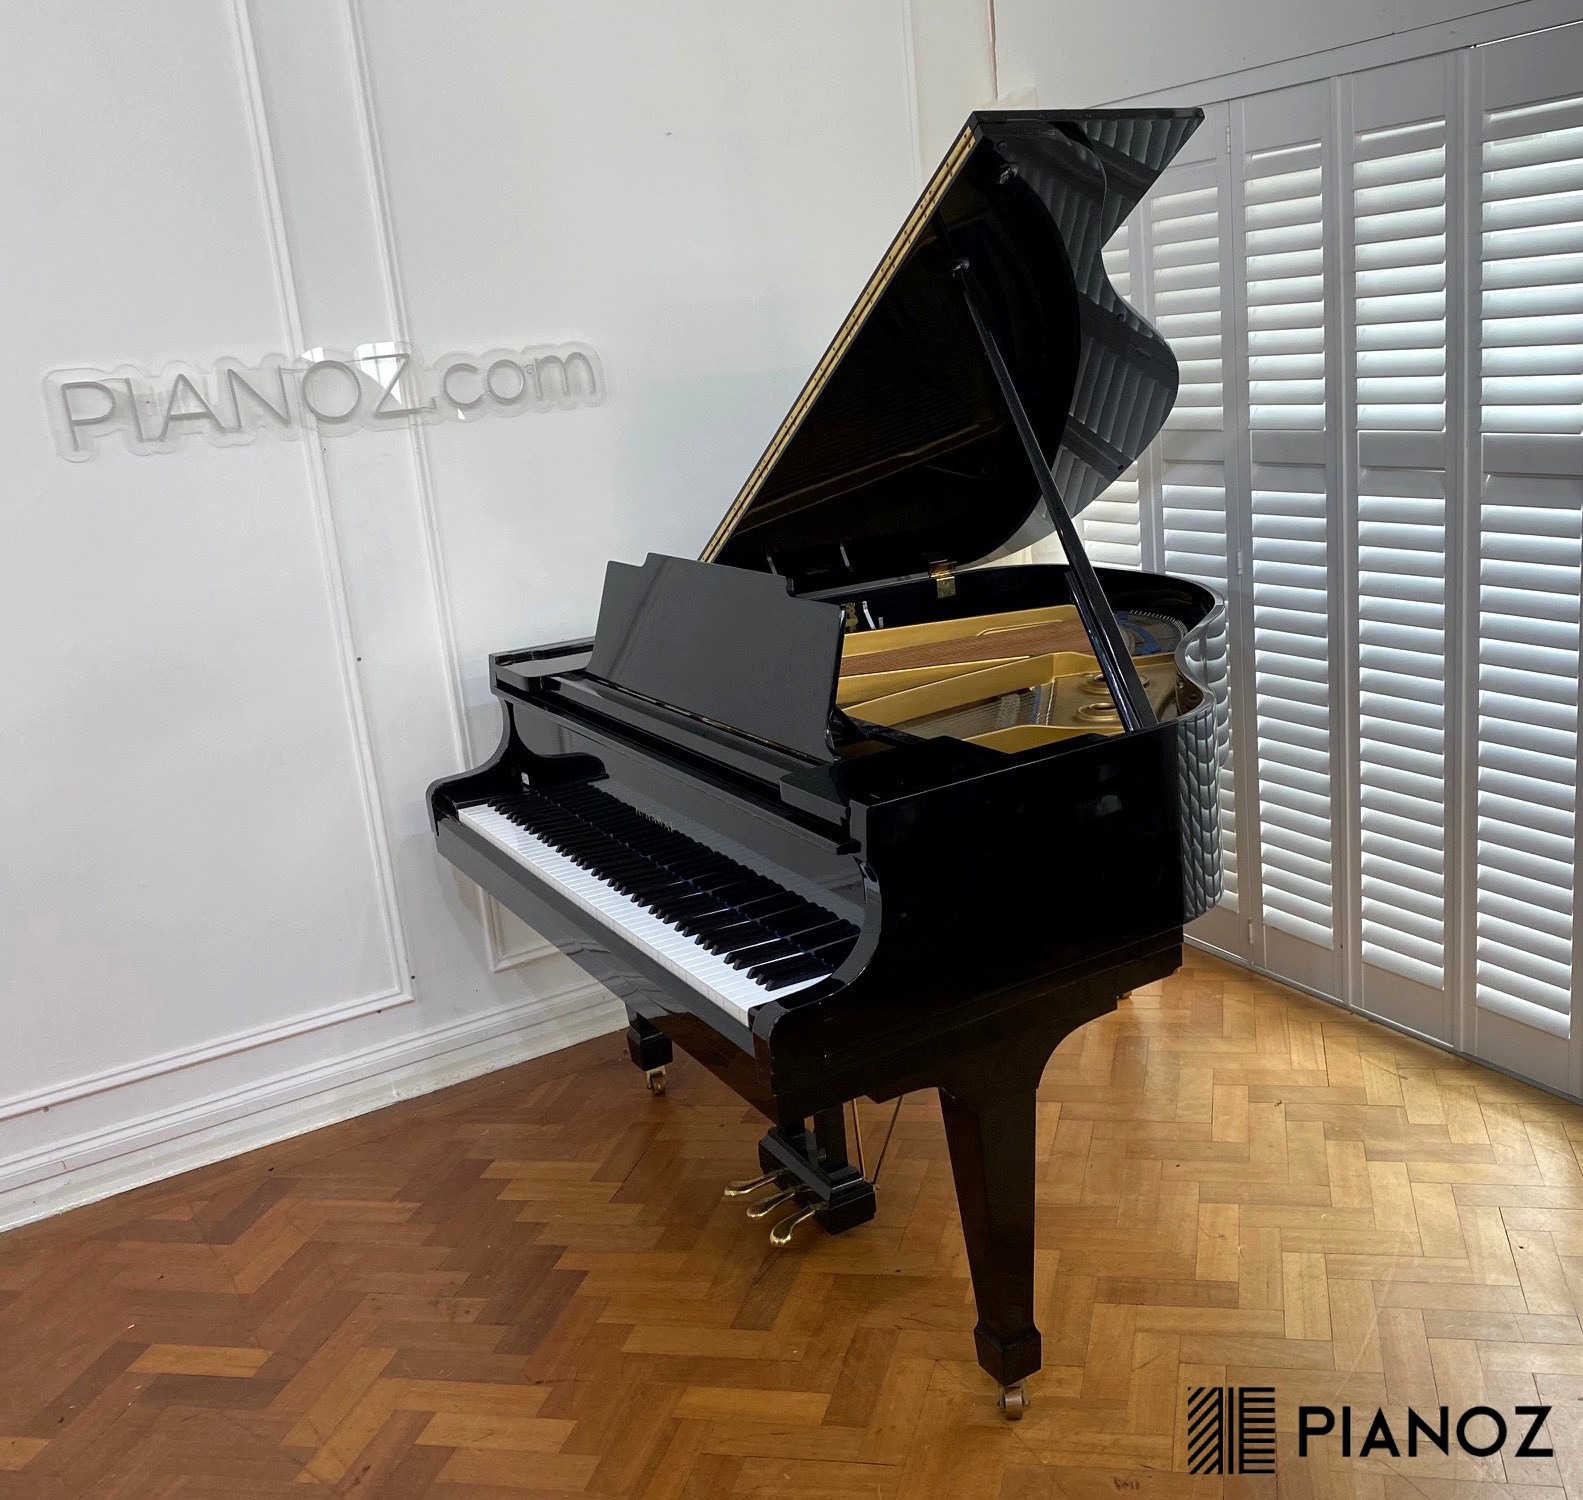 junk Perpetrator Mule Kawai KG1C Japanese Baby Grand Piano for sale UK | P I A N O Z - The  Ultimate Online Piano Showroom - UK Piano Shop - Black Baby Grands